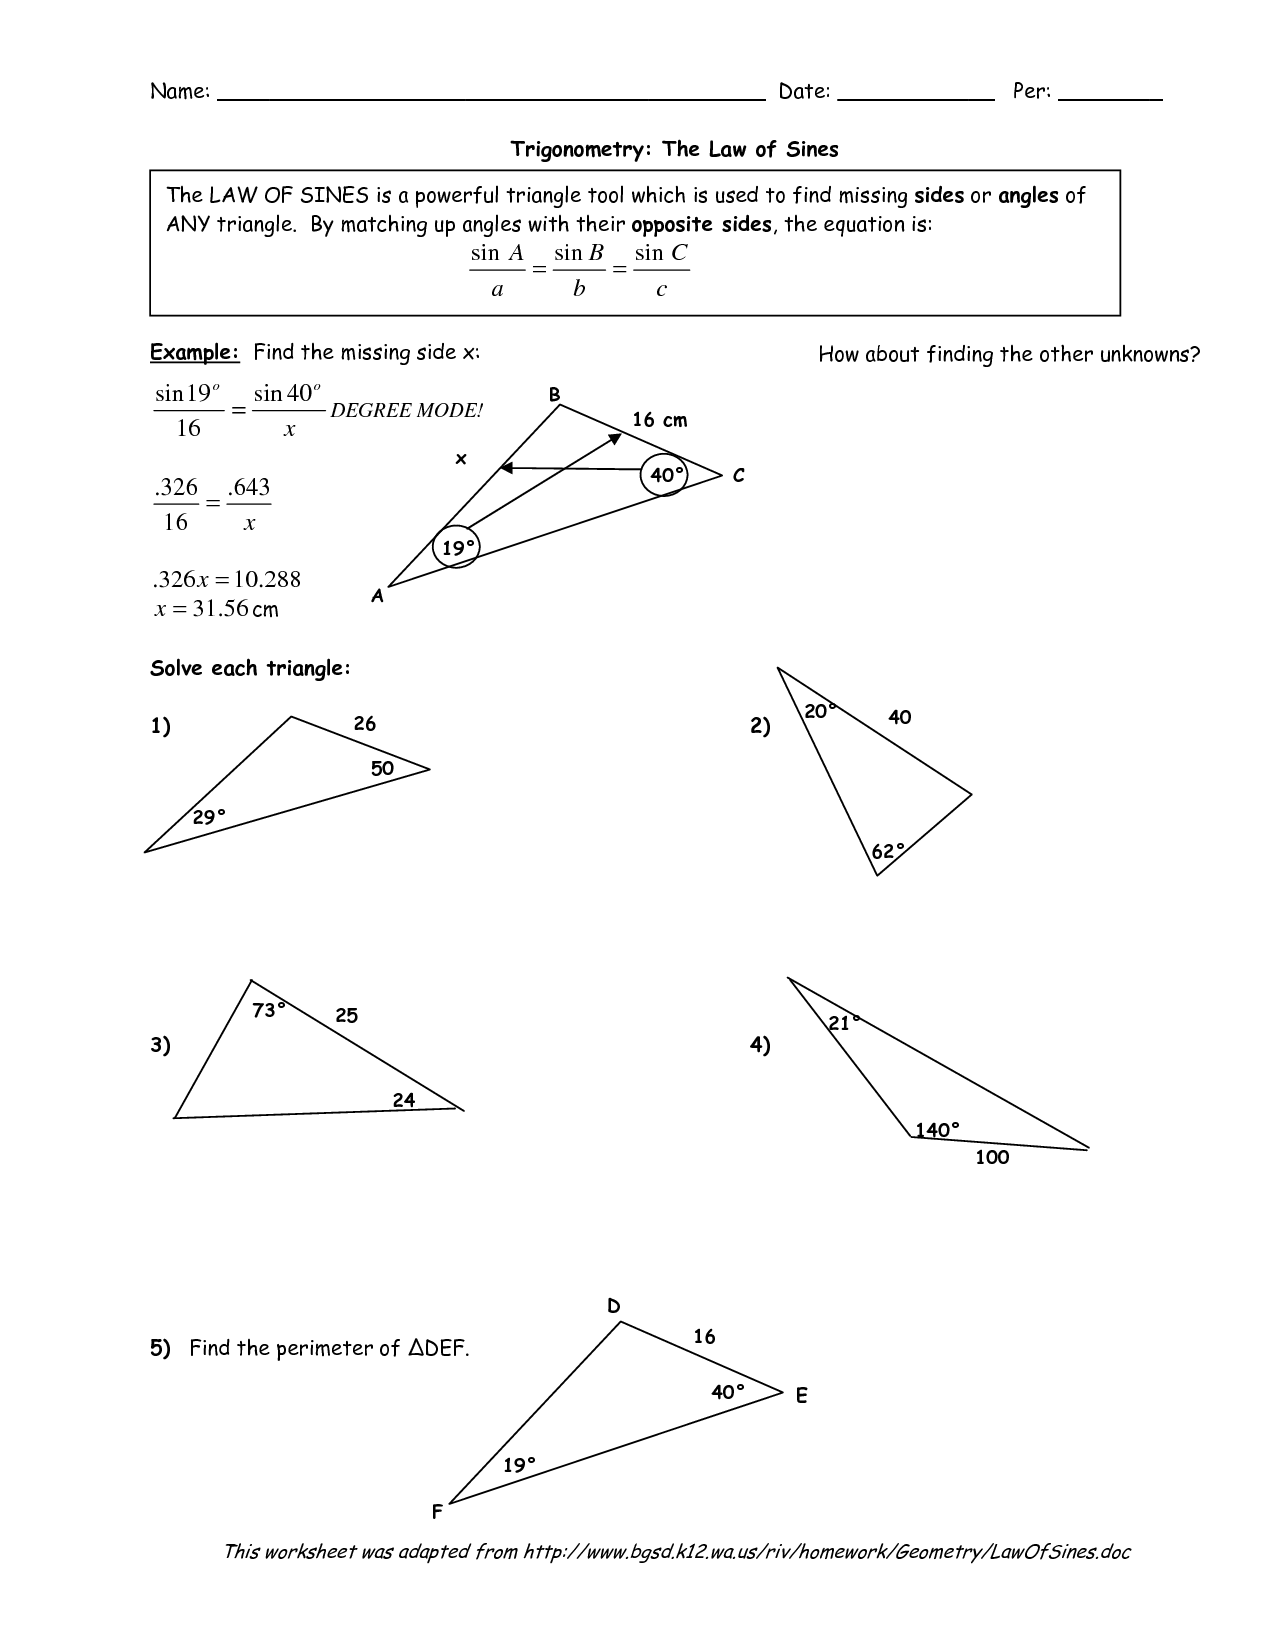 law-of-sines-worksheet-free-download-qstion-co